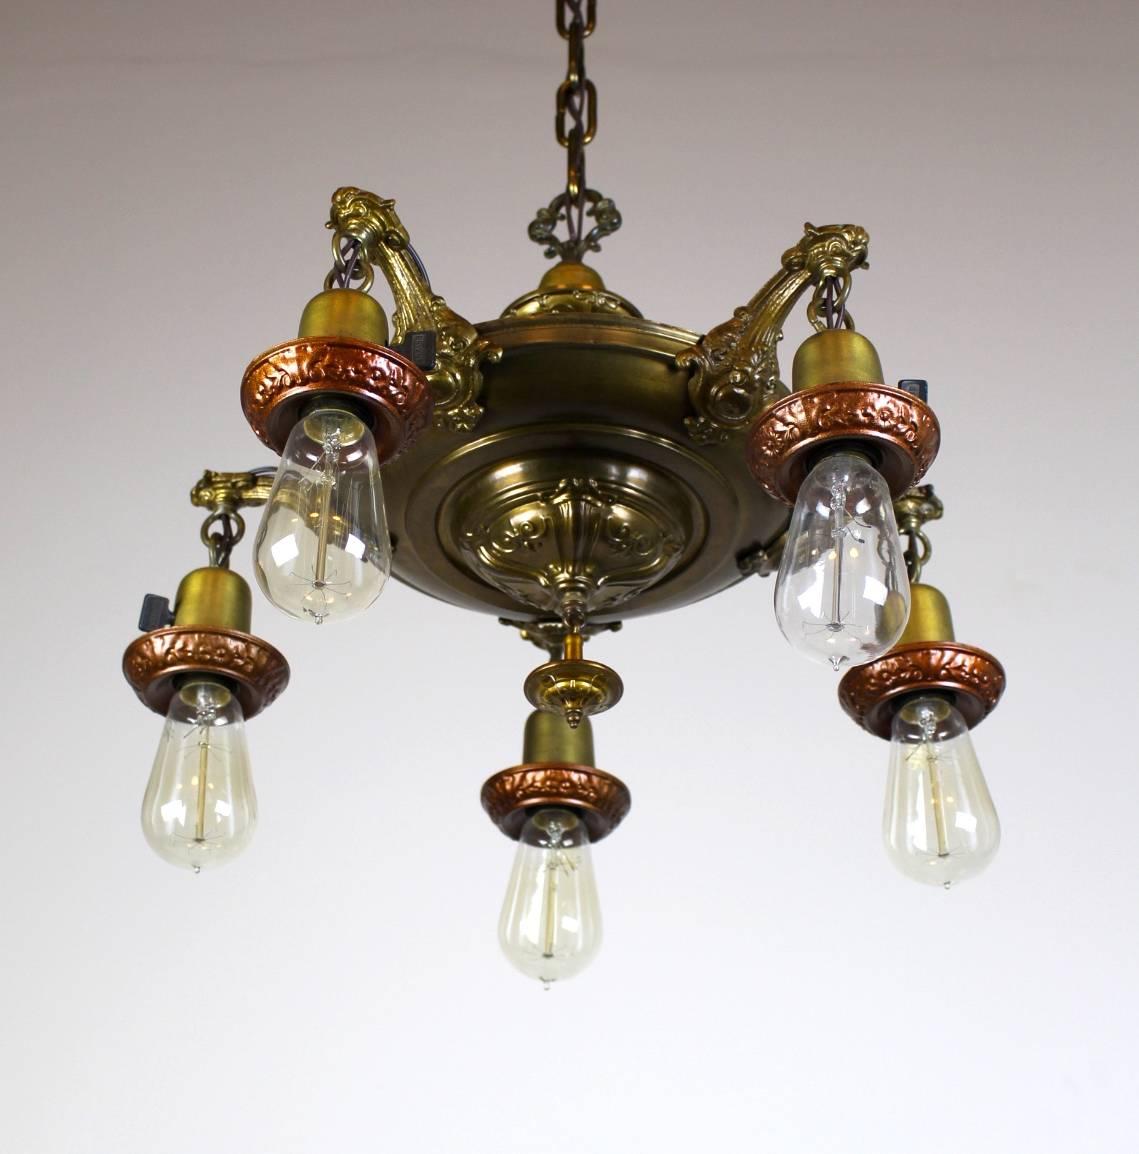 Nicely embossed five-light pan fixture with a lacquered old brass finish.

Restored to original condition, with rouged decorative bulb surrounds.

circa 1925

Measures: 38